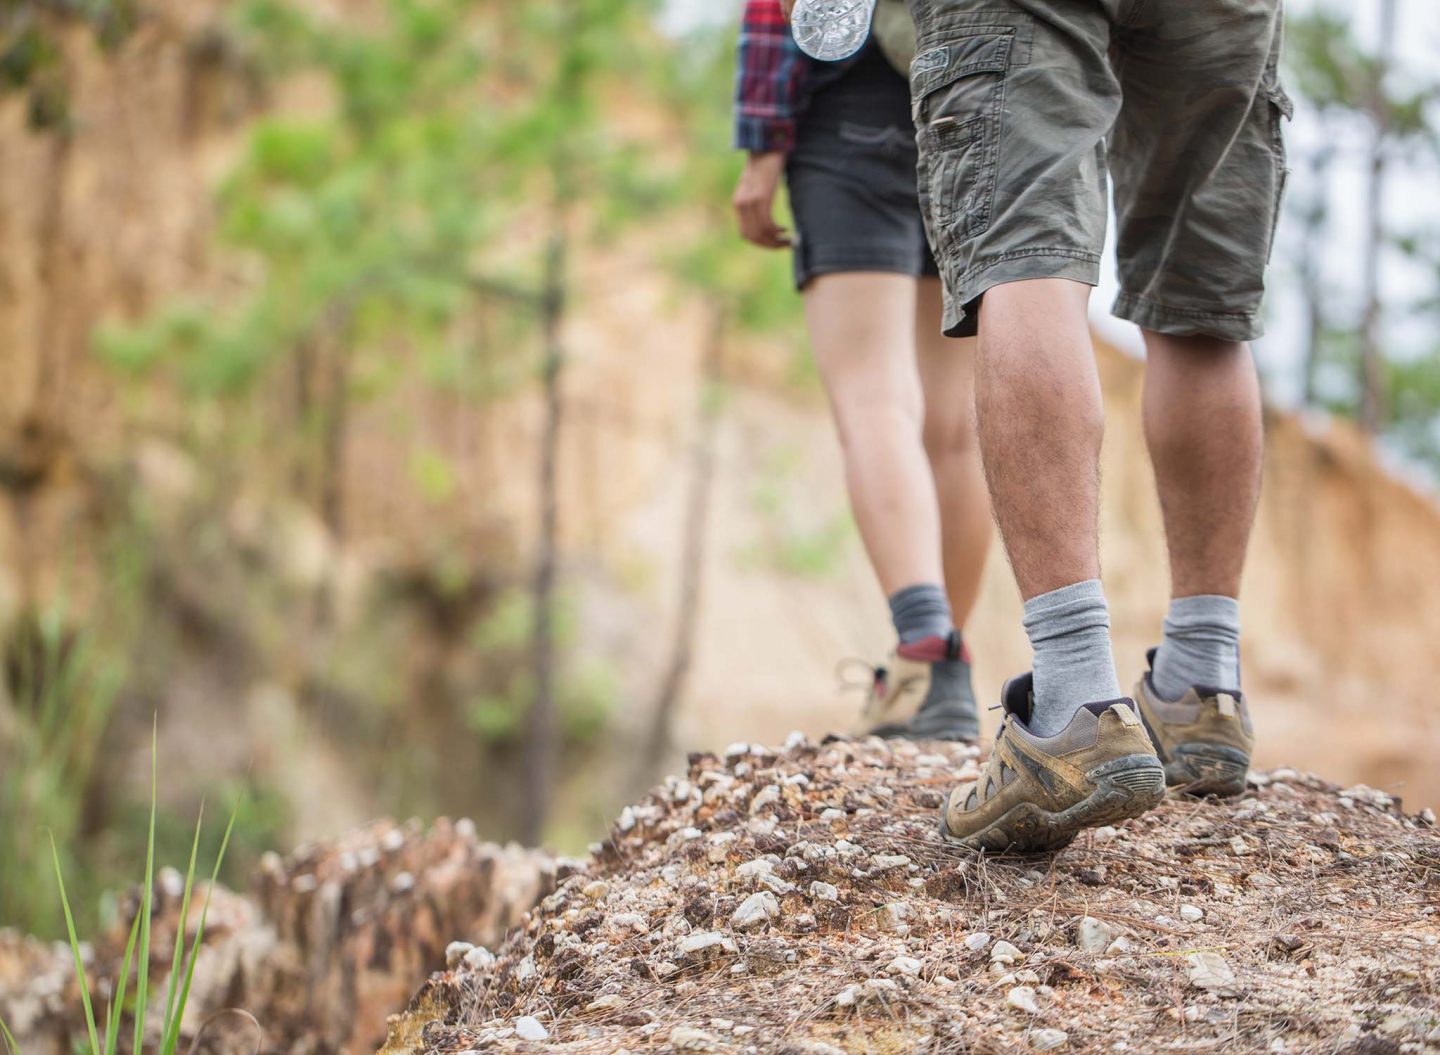 How to Get Your Partner into Hiking ⋆ The Outdoor Adventure Blog